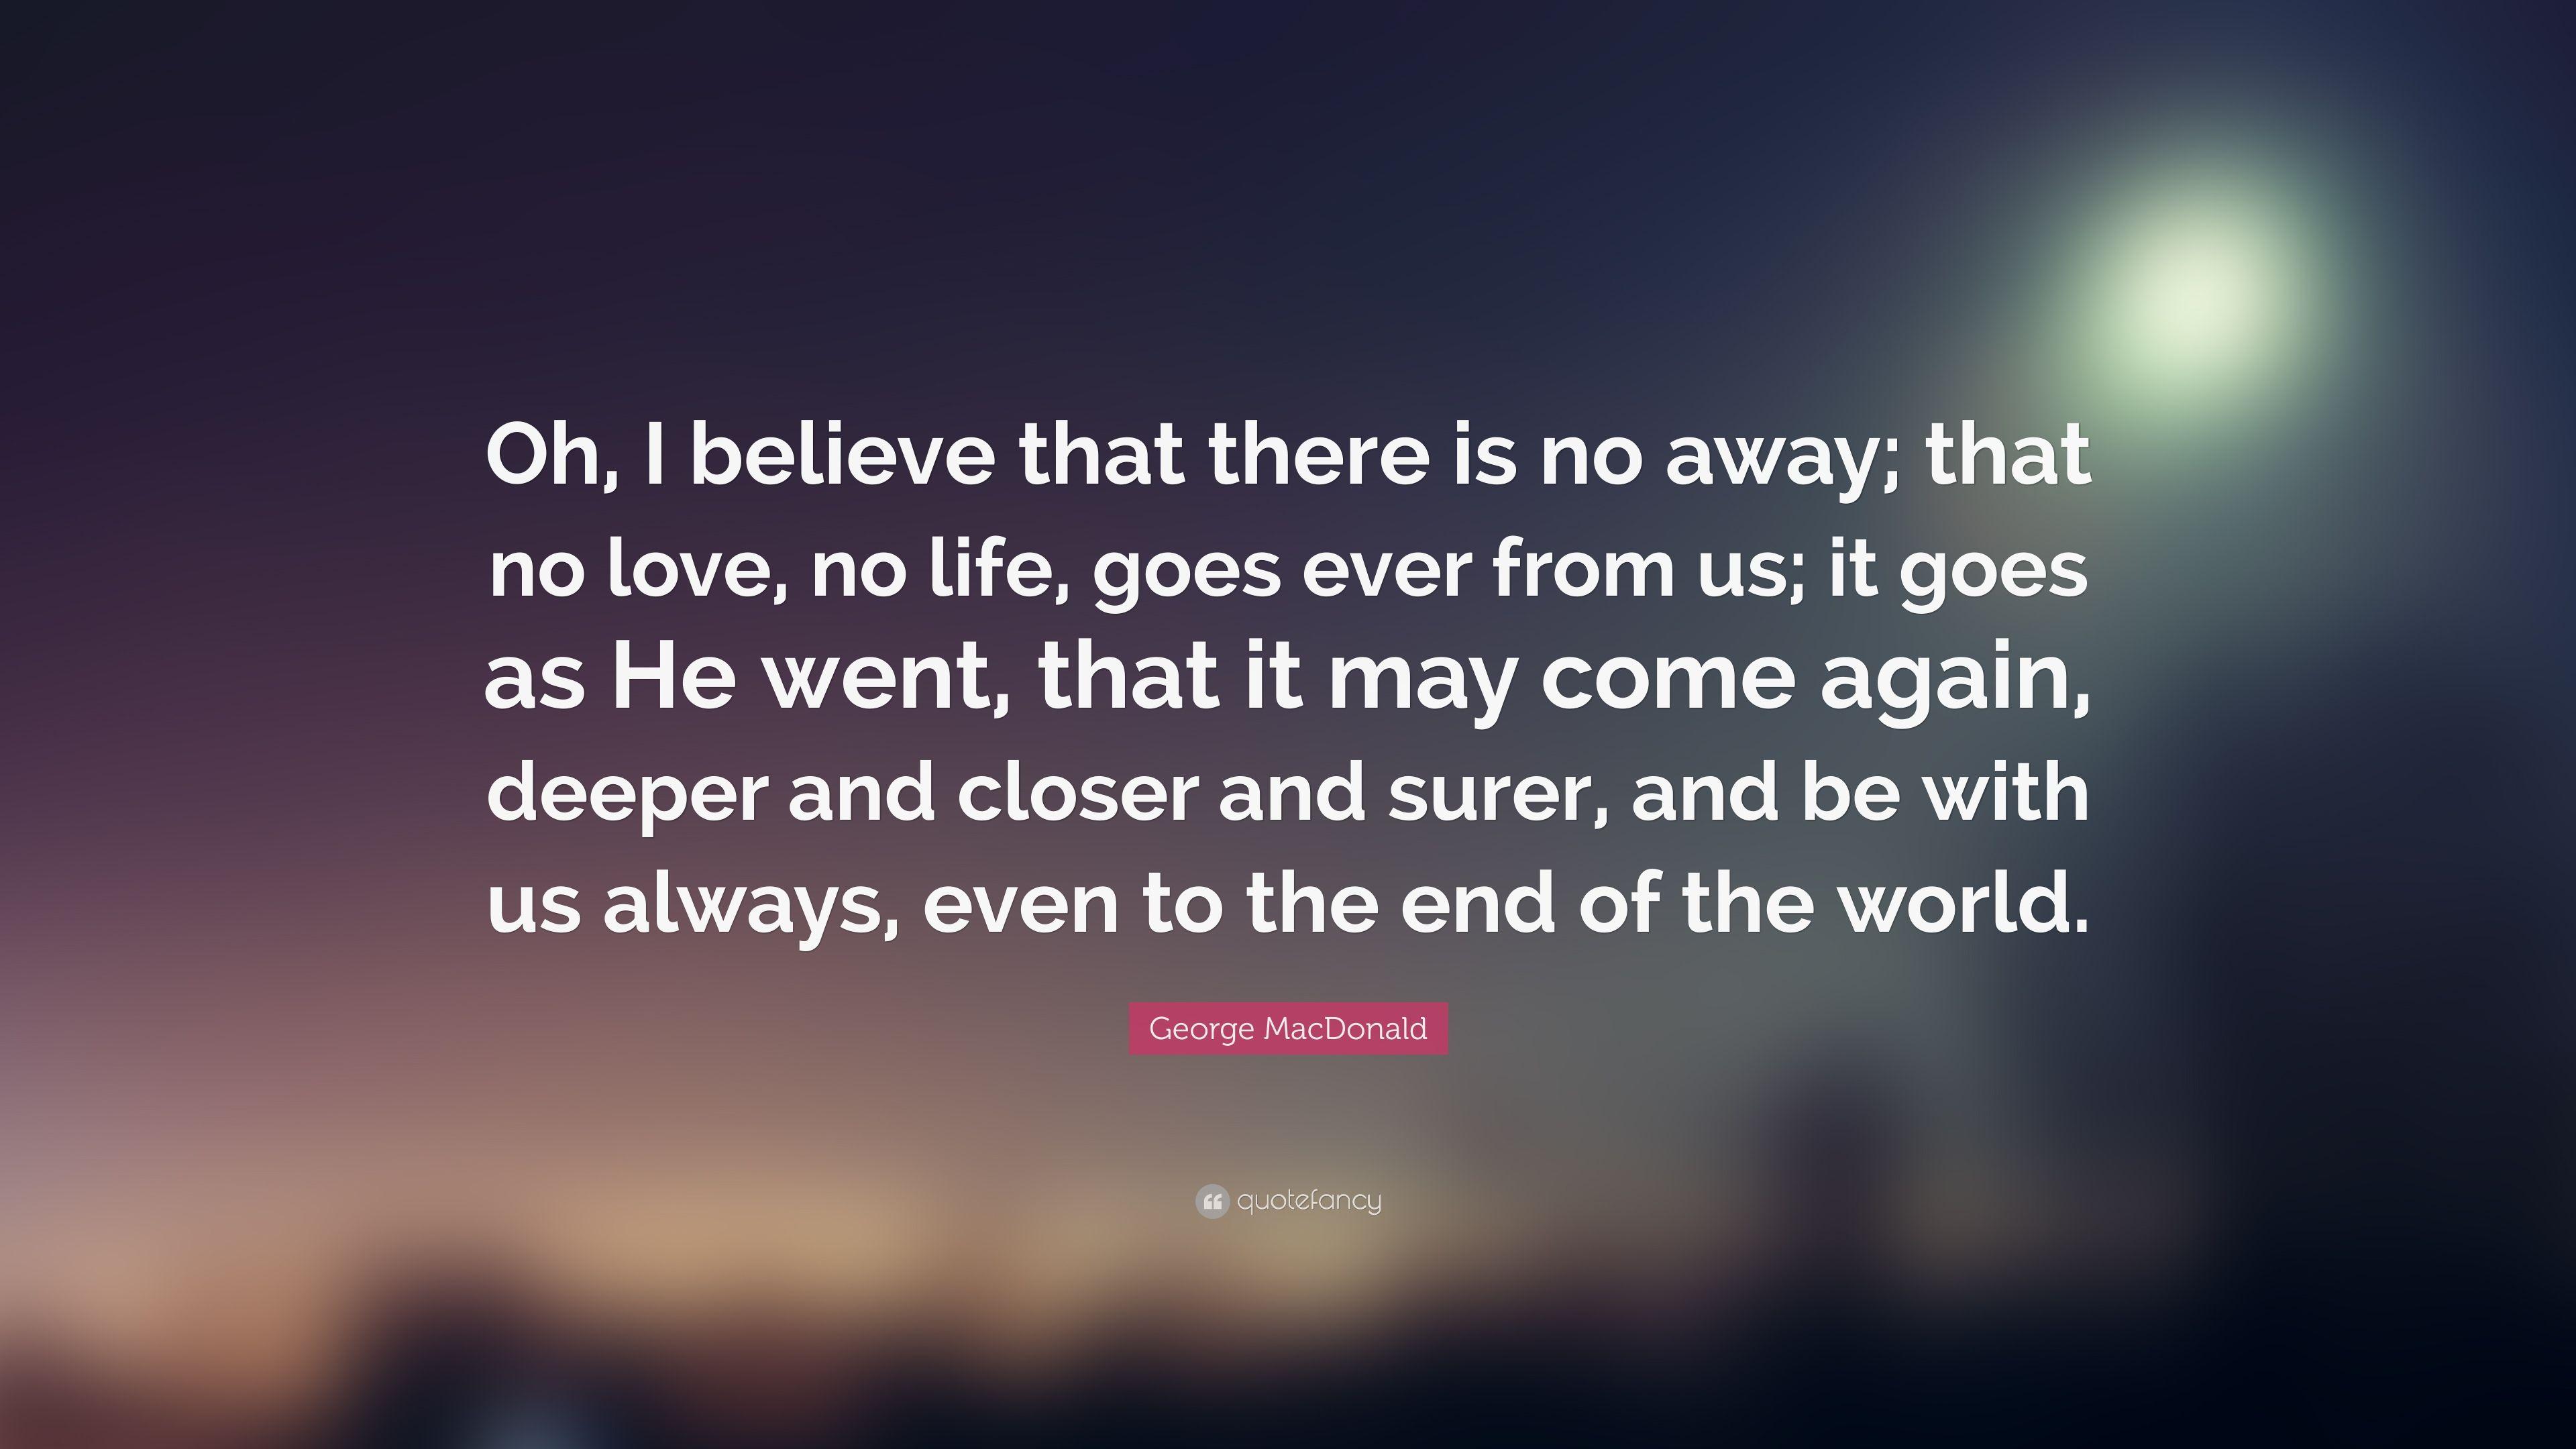 George MacDonald Quote: “Oh, I believe that there is no away; that